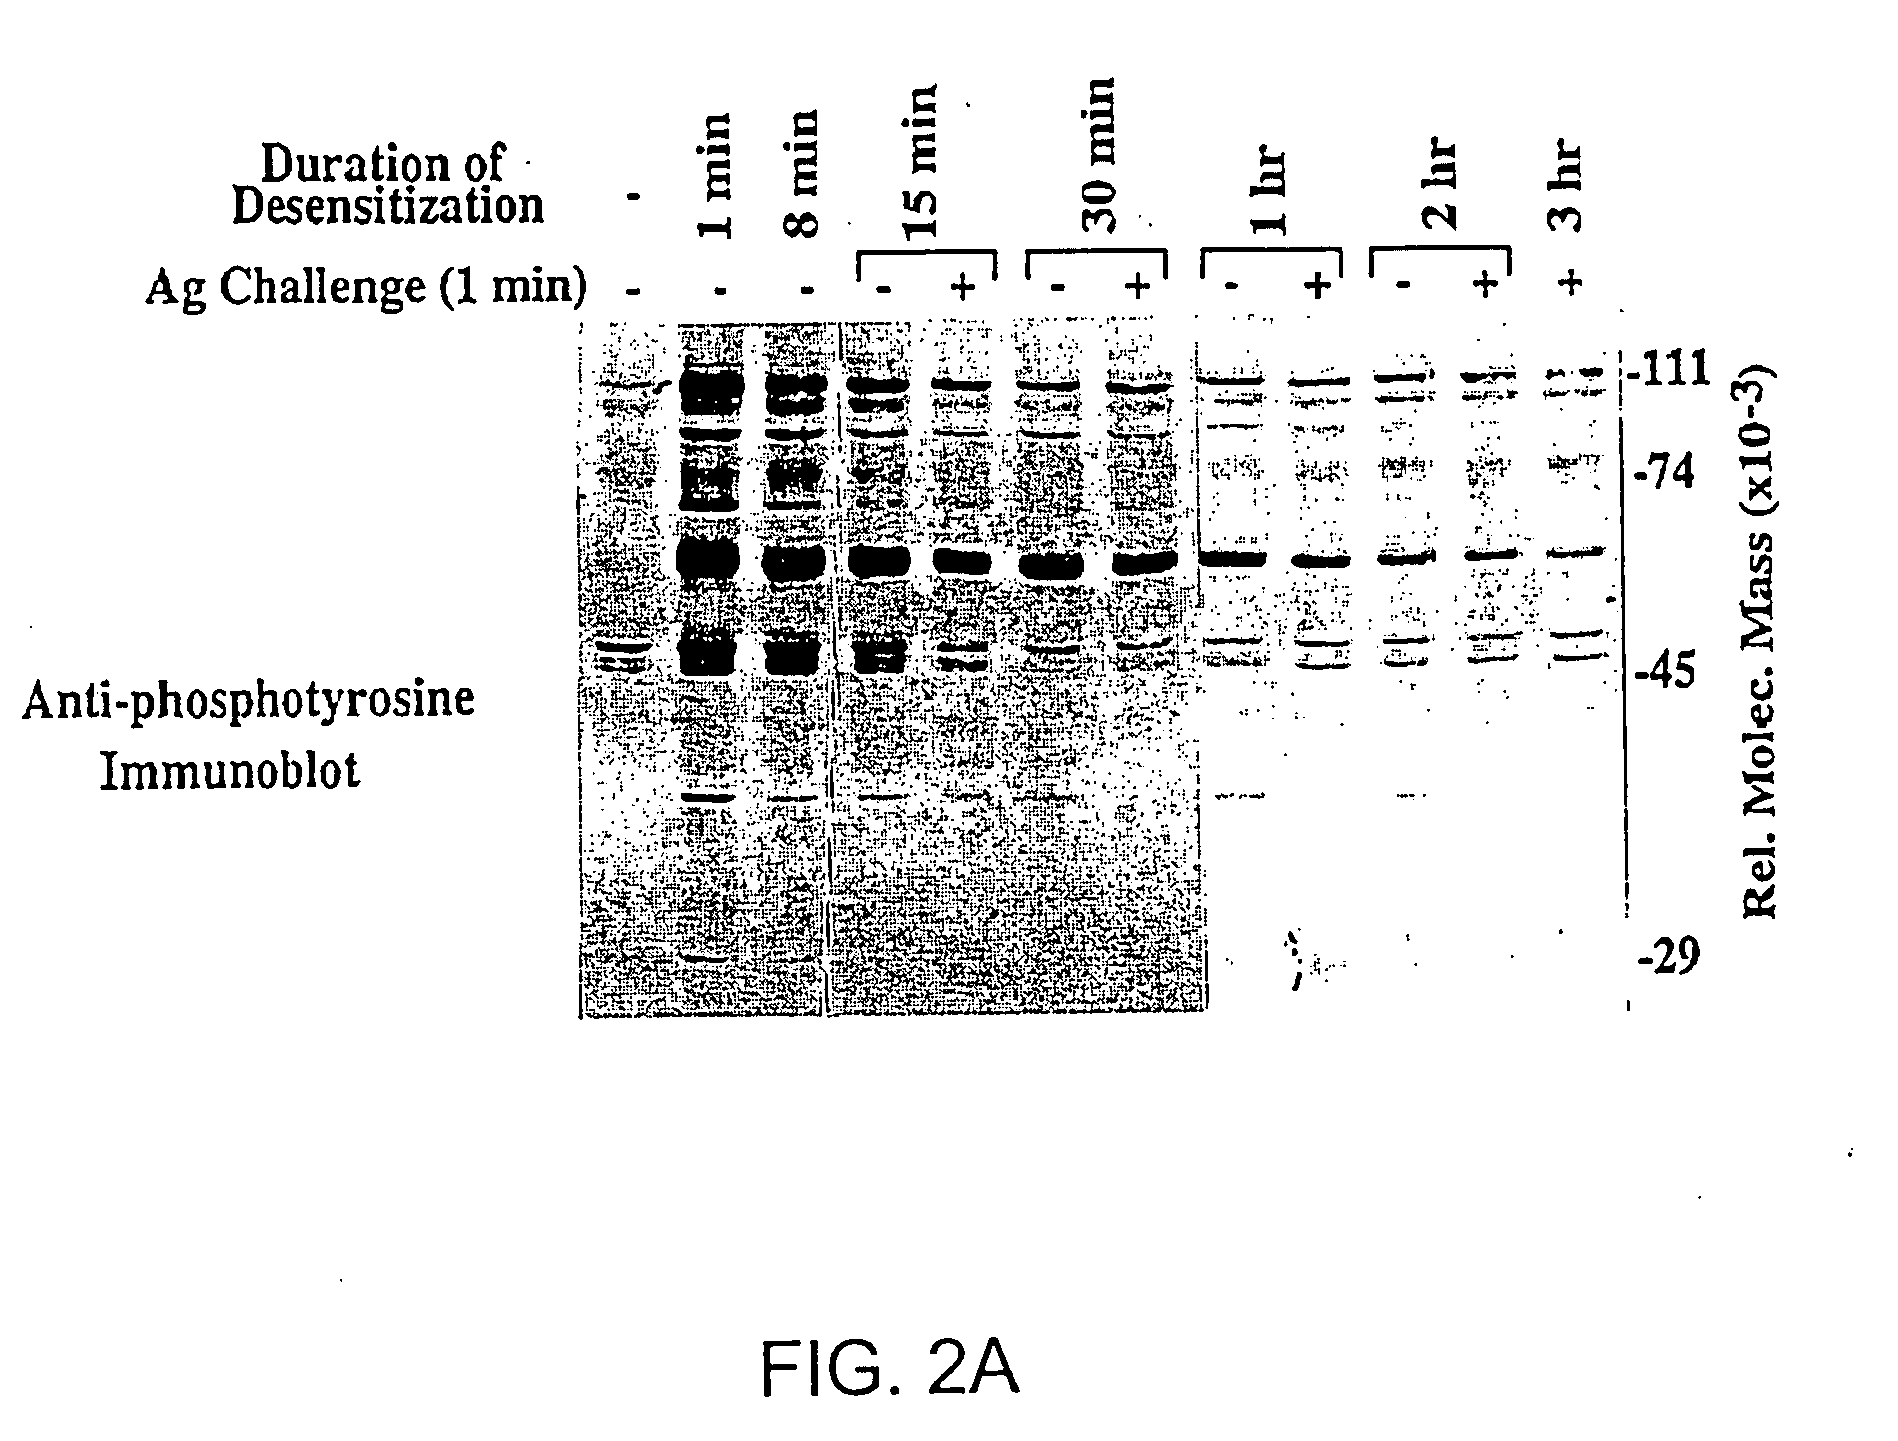 Product and method for treatment of conditions associated with receptor-desensitization